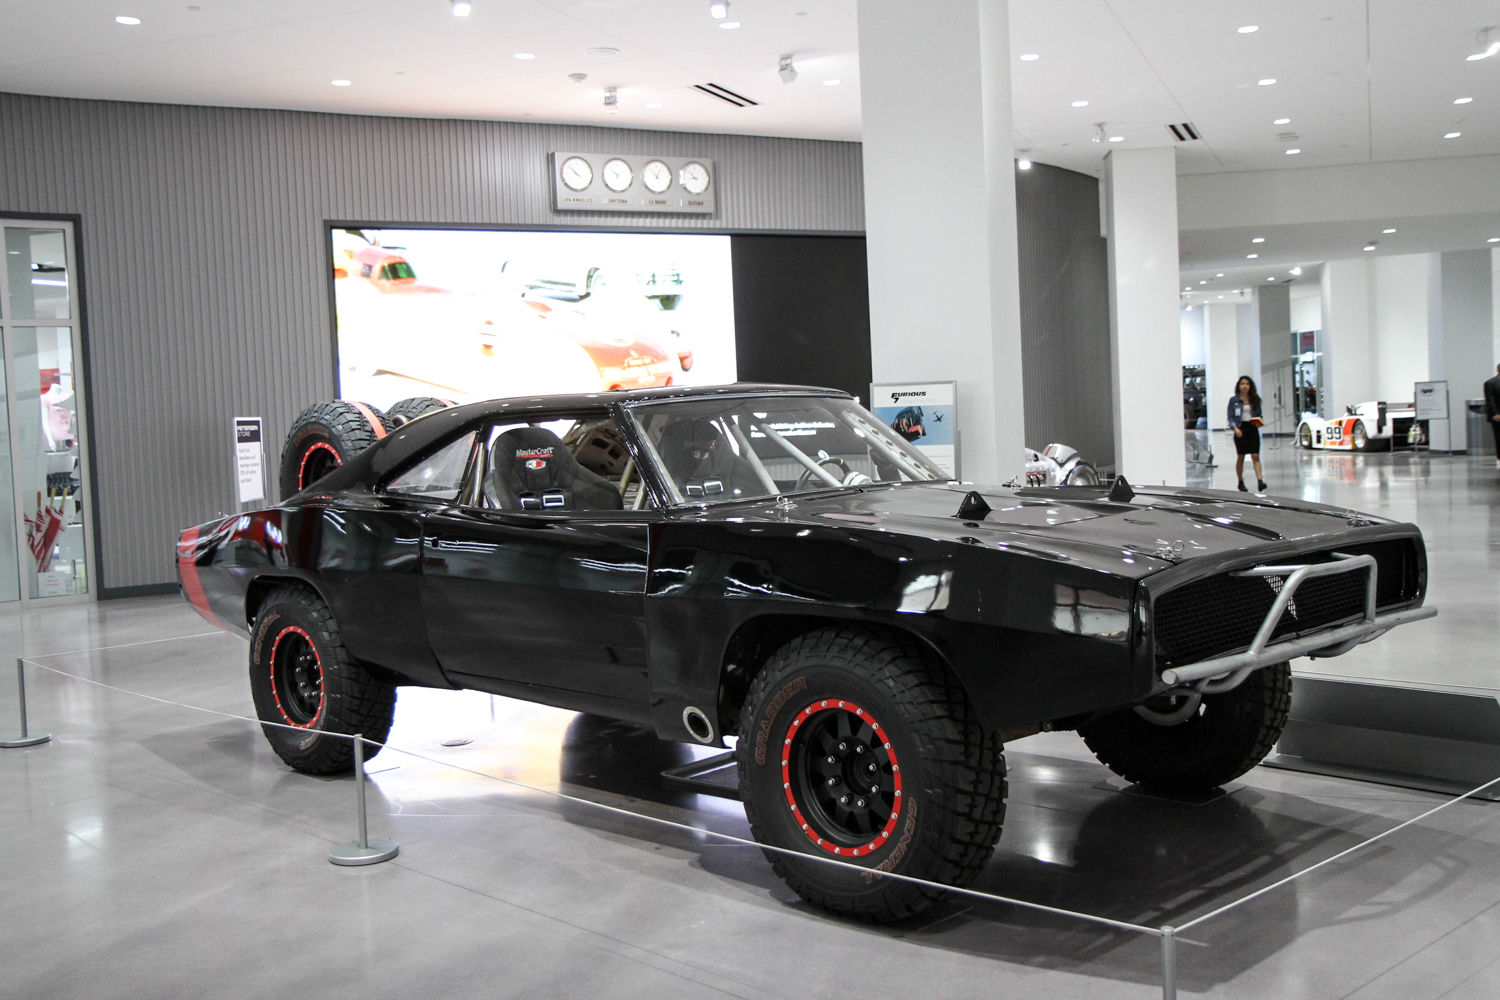 'Furious 7' Off Road Dodge Charger R/T on Full Display - DodgeForum.com